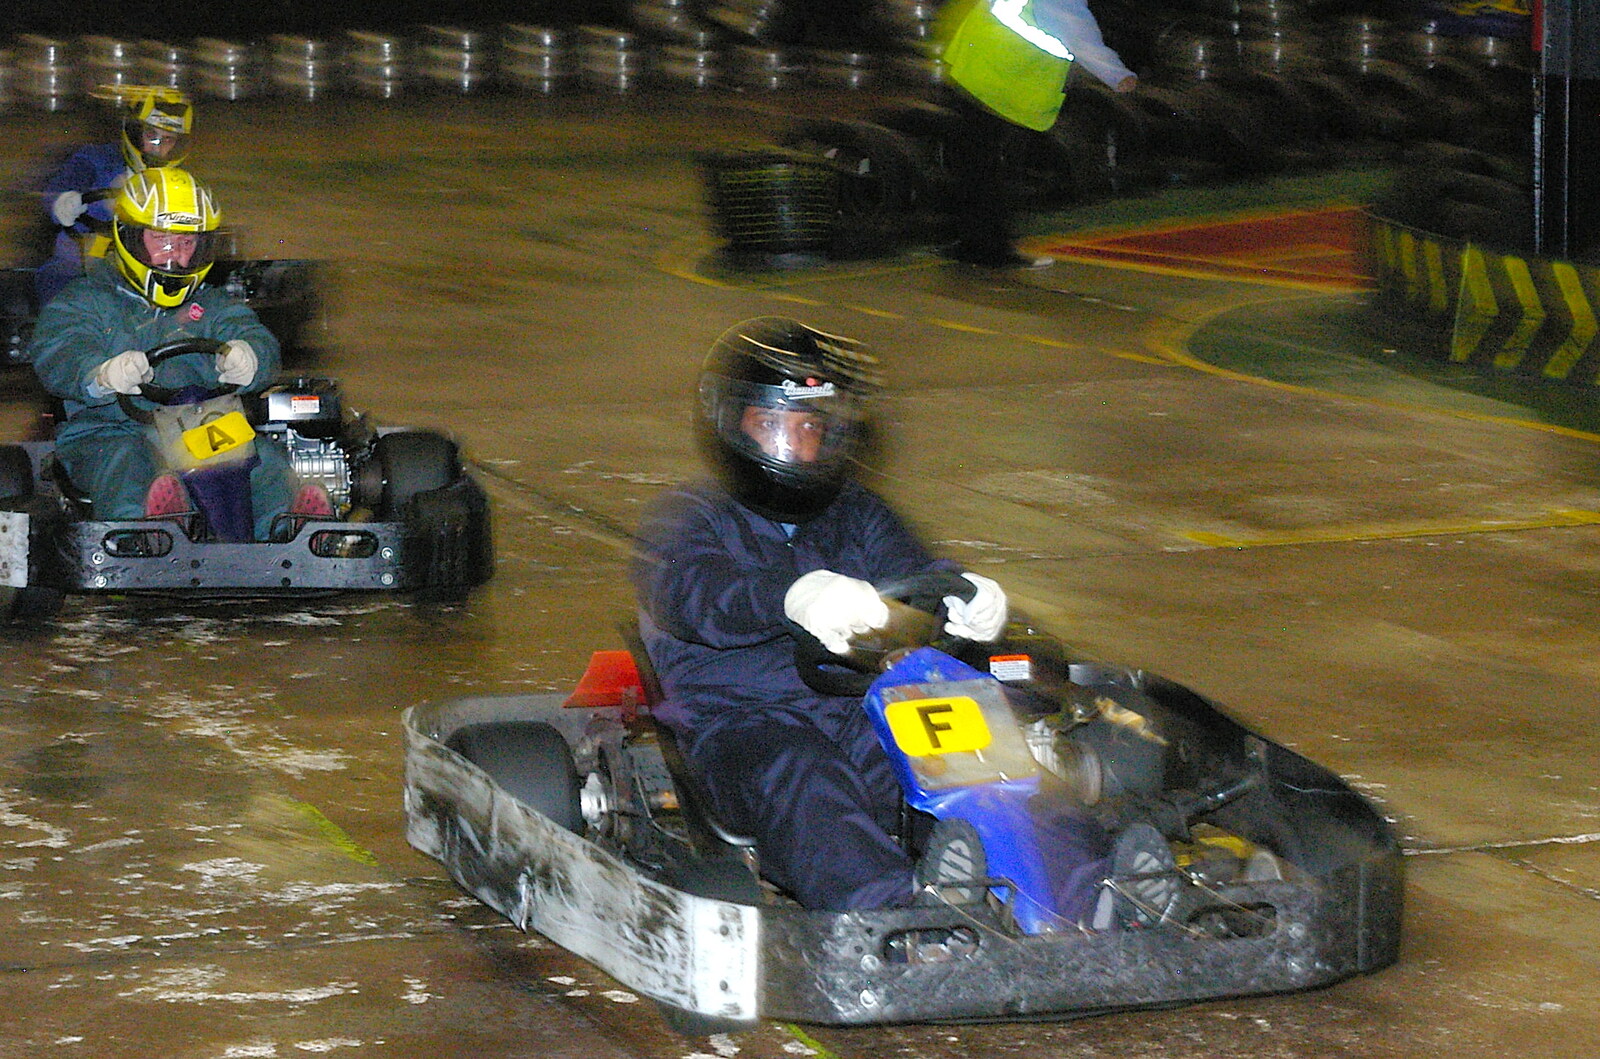 The race is on from Qualcomm goes Karting in Caxton, Cambridgeshire - 7th November 2005